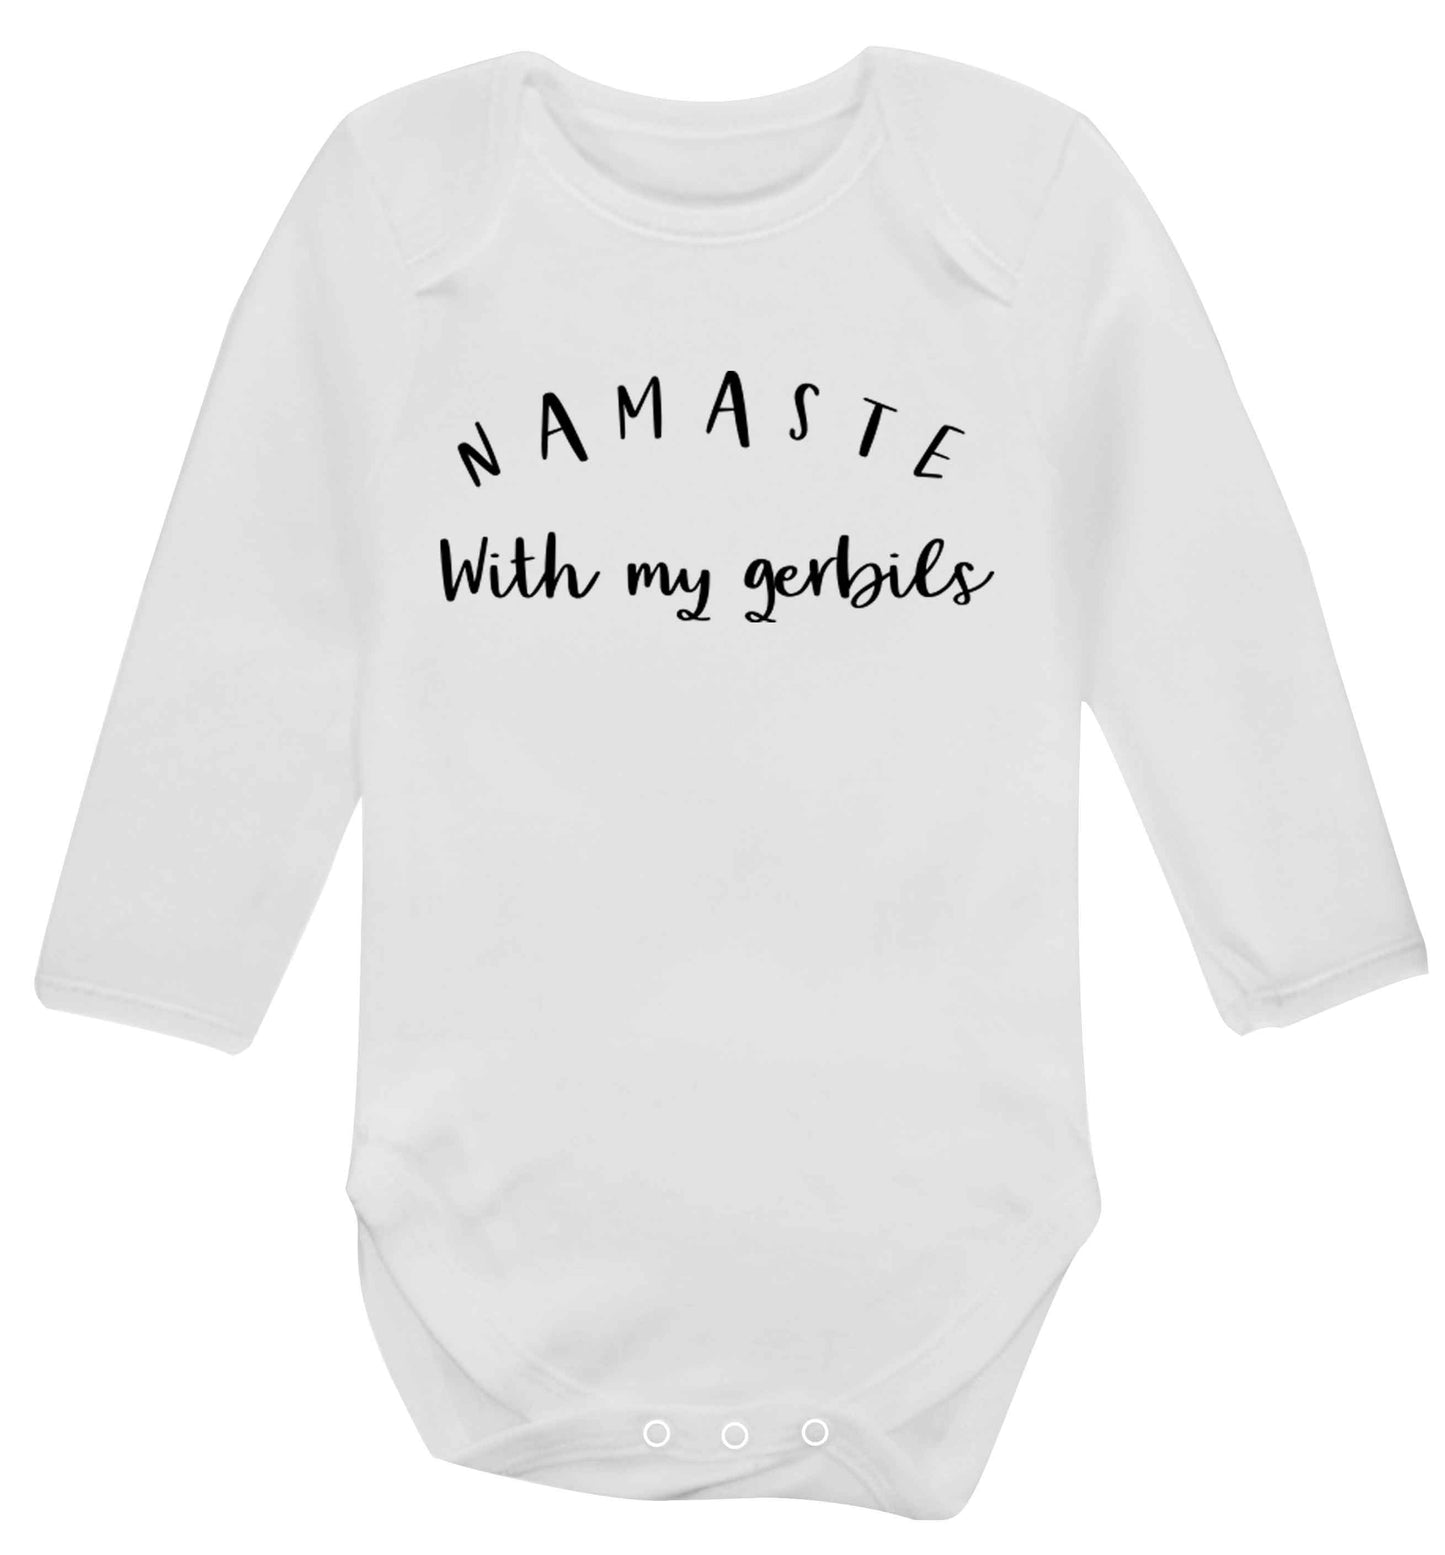 Namaste with my gerbils Baby Vest long sleeved white 6-12 months